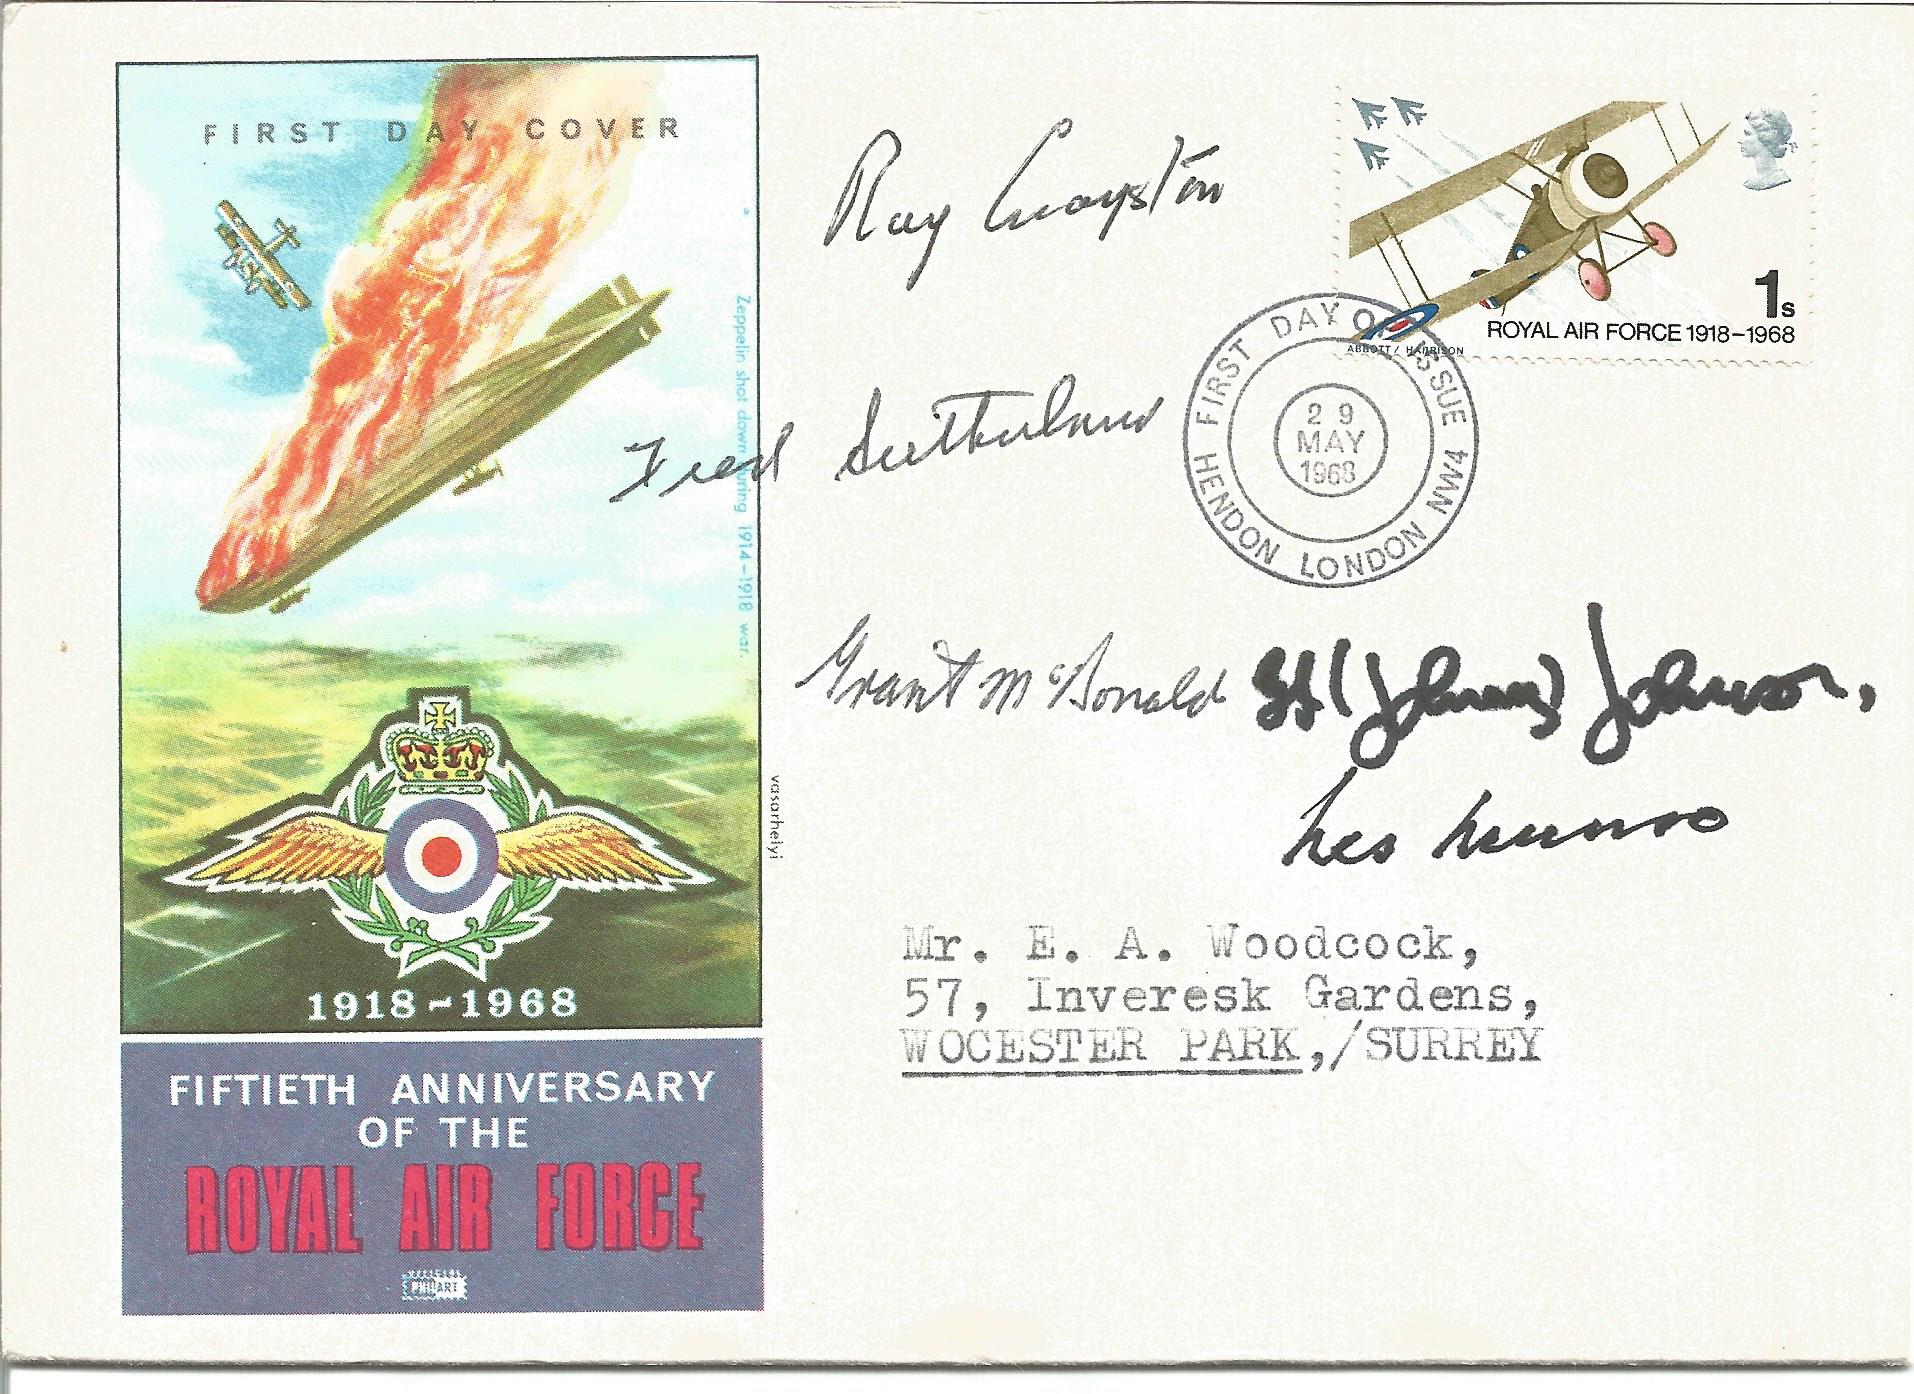 Dambusters World War Two cover signed by Sqn Ldr J. Les Munro CNZM, DSO, QSO, DFC, Sqn Ldr George